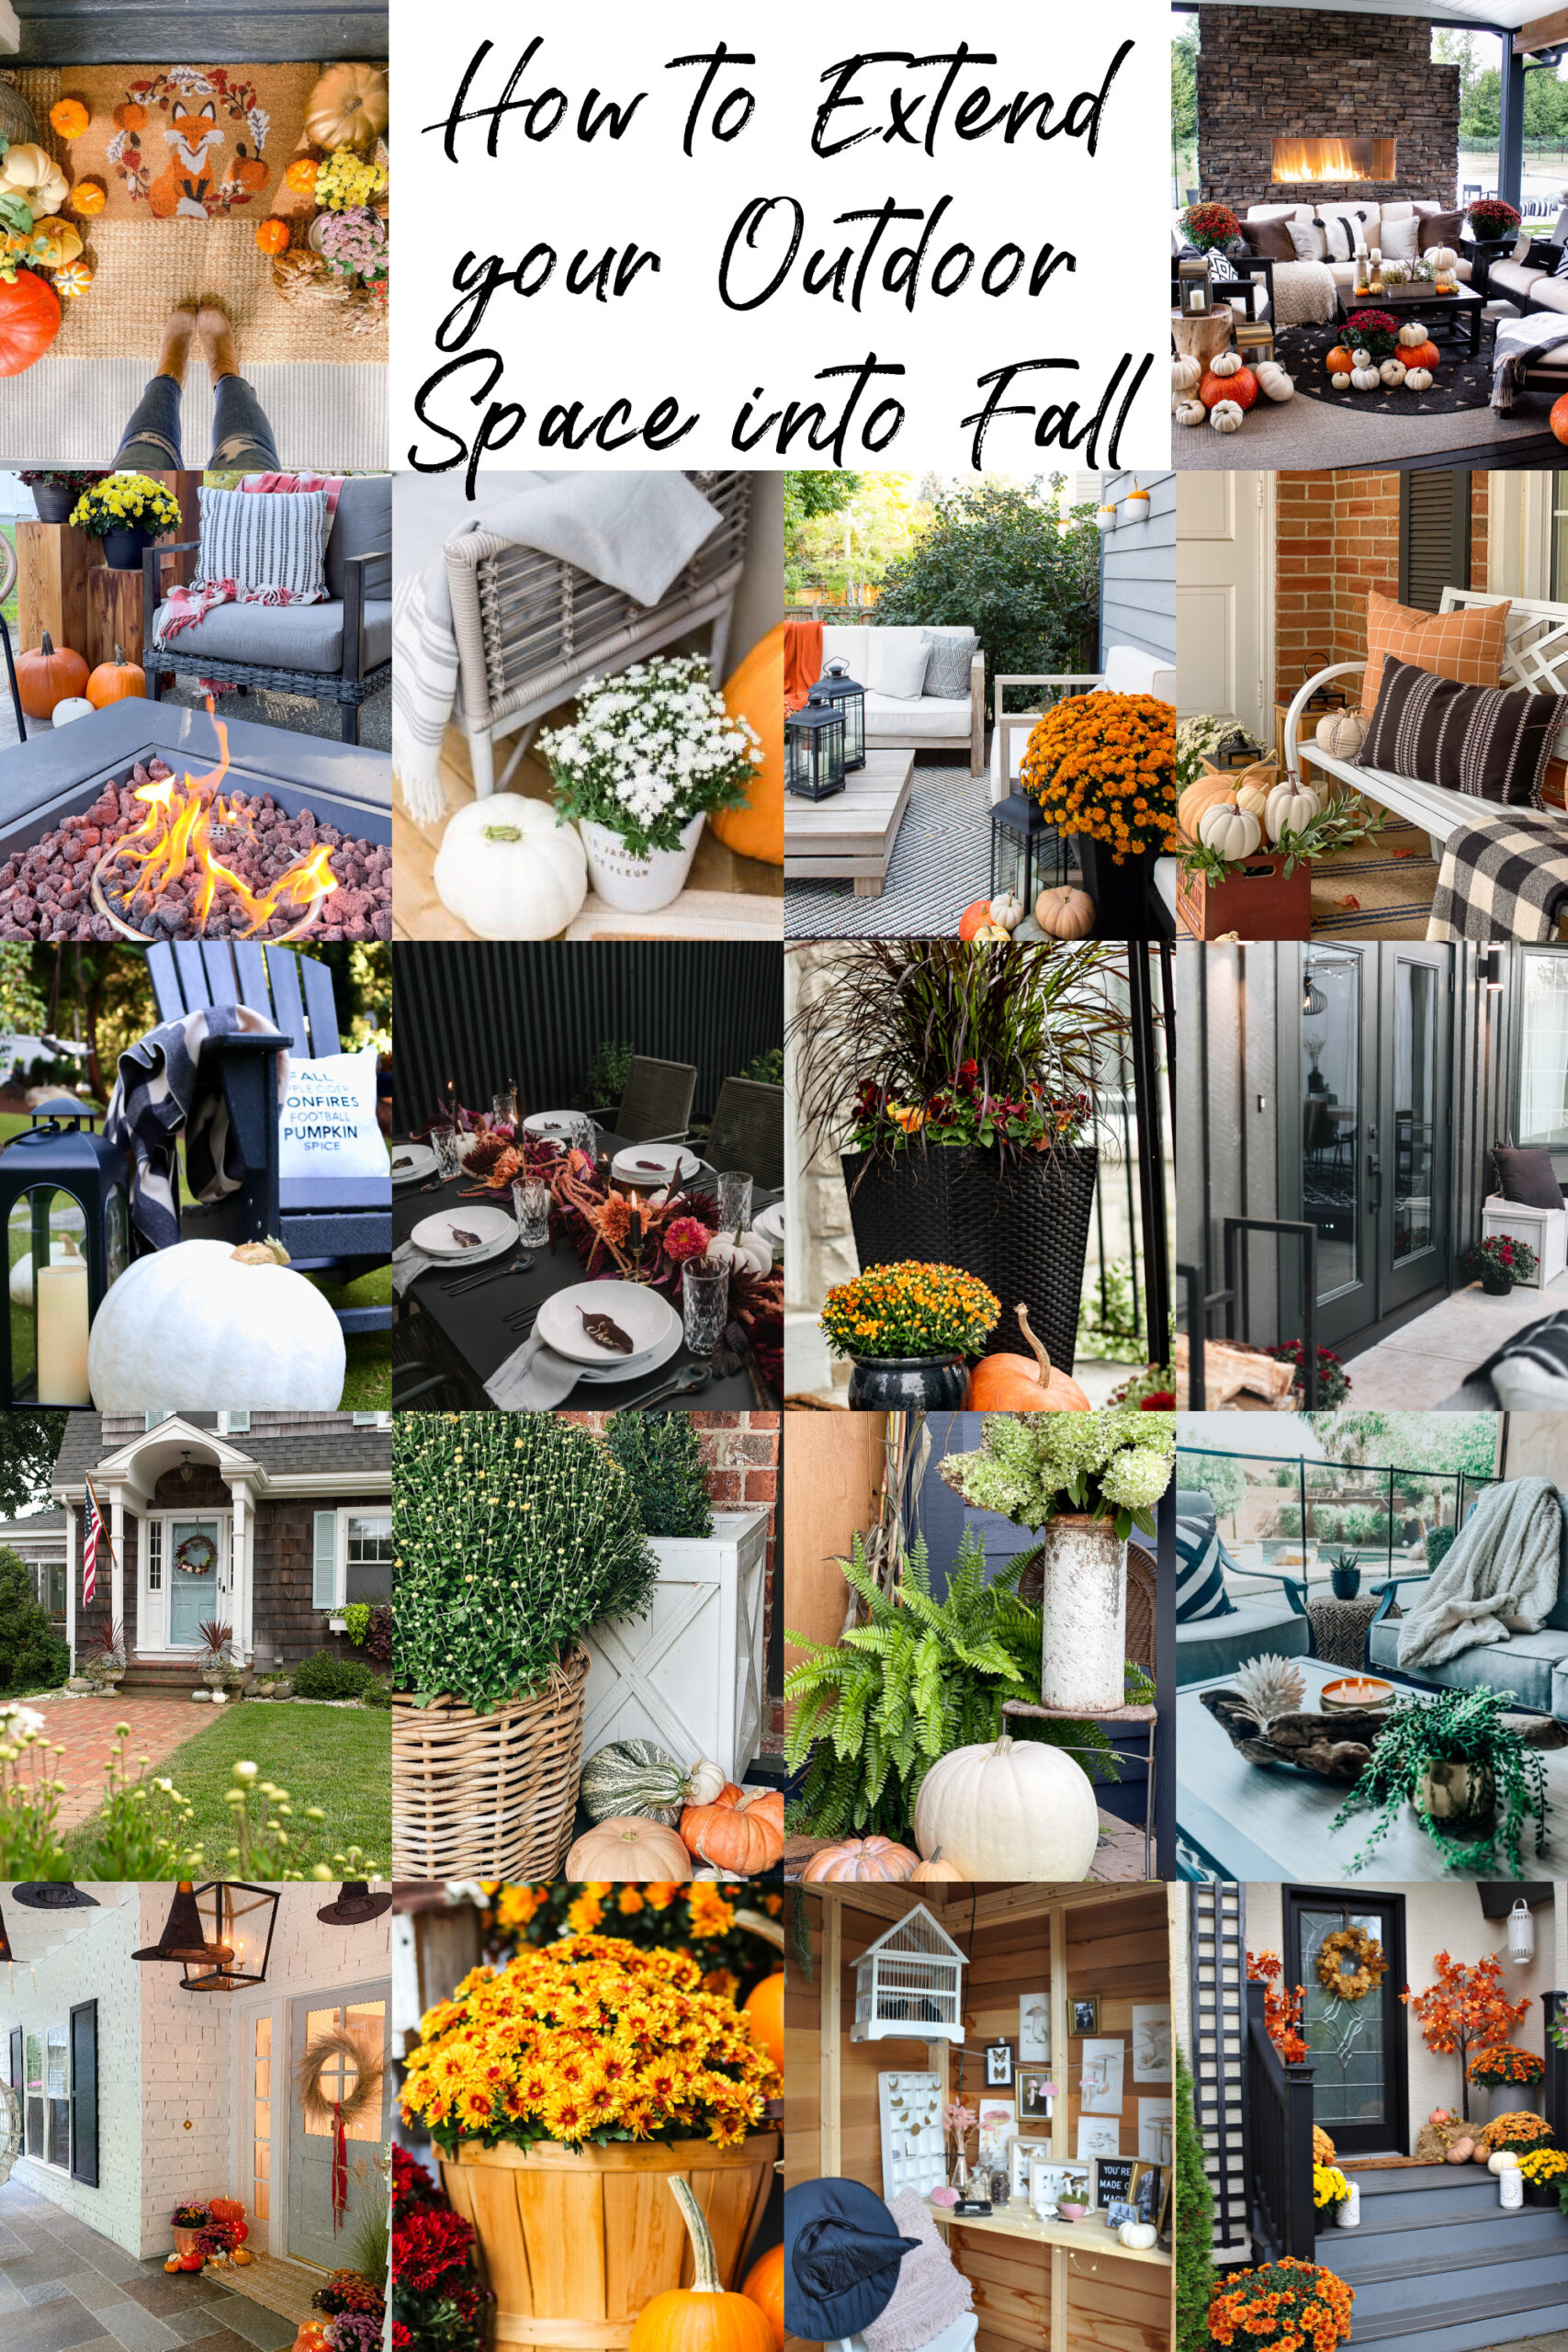 How To Extend Your Outdoor Space Into Fall graphic.